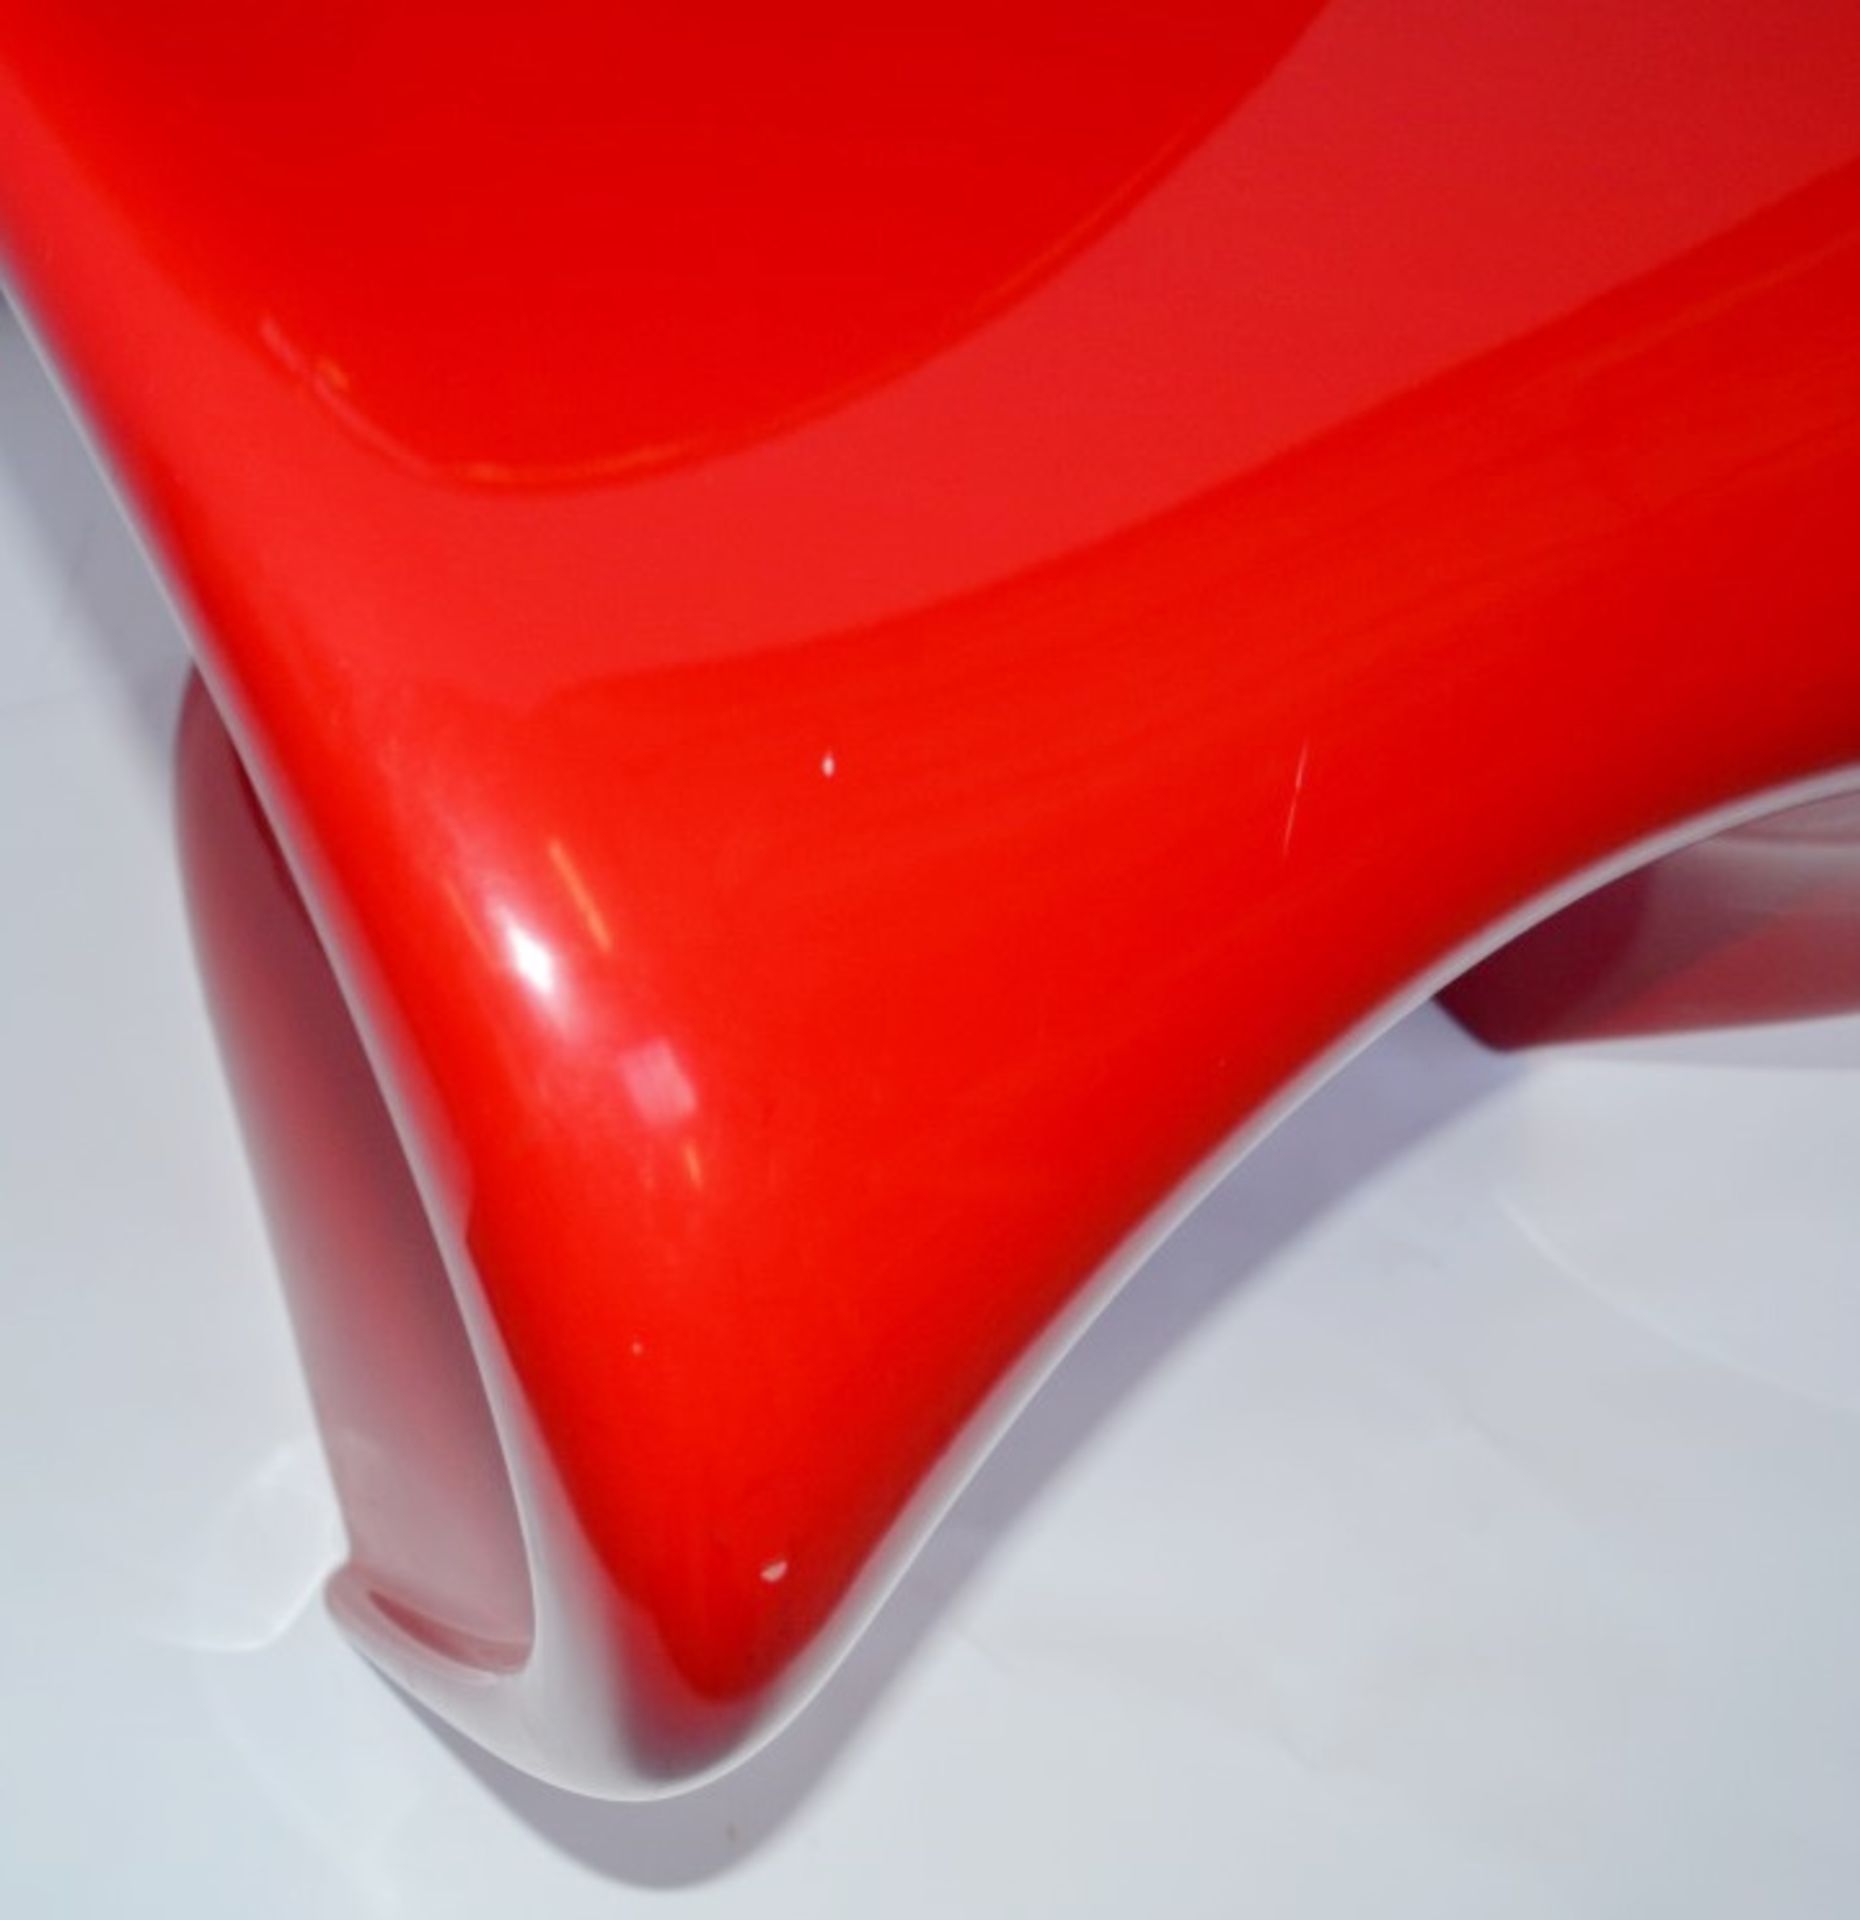 1 x VITRA Panton Chair In Classic Red - Measurements: W50 x D60 x H83cm, Seat Height: 41cm - - Image 3 of 8